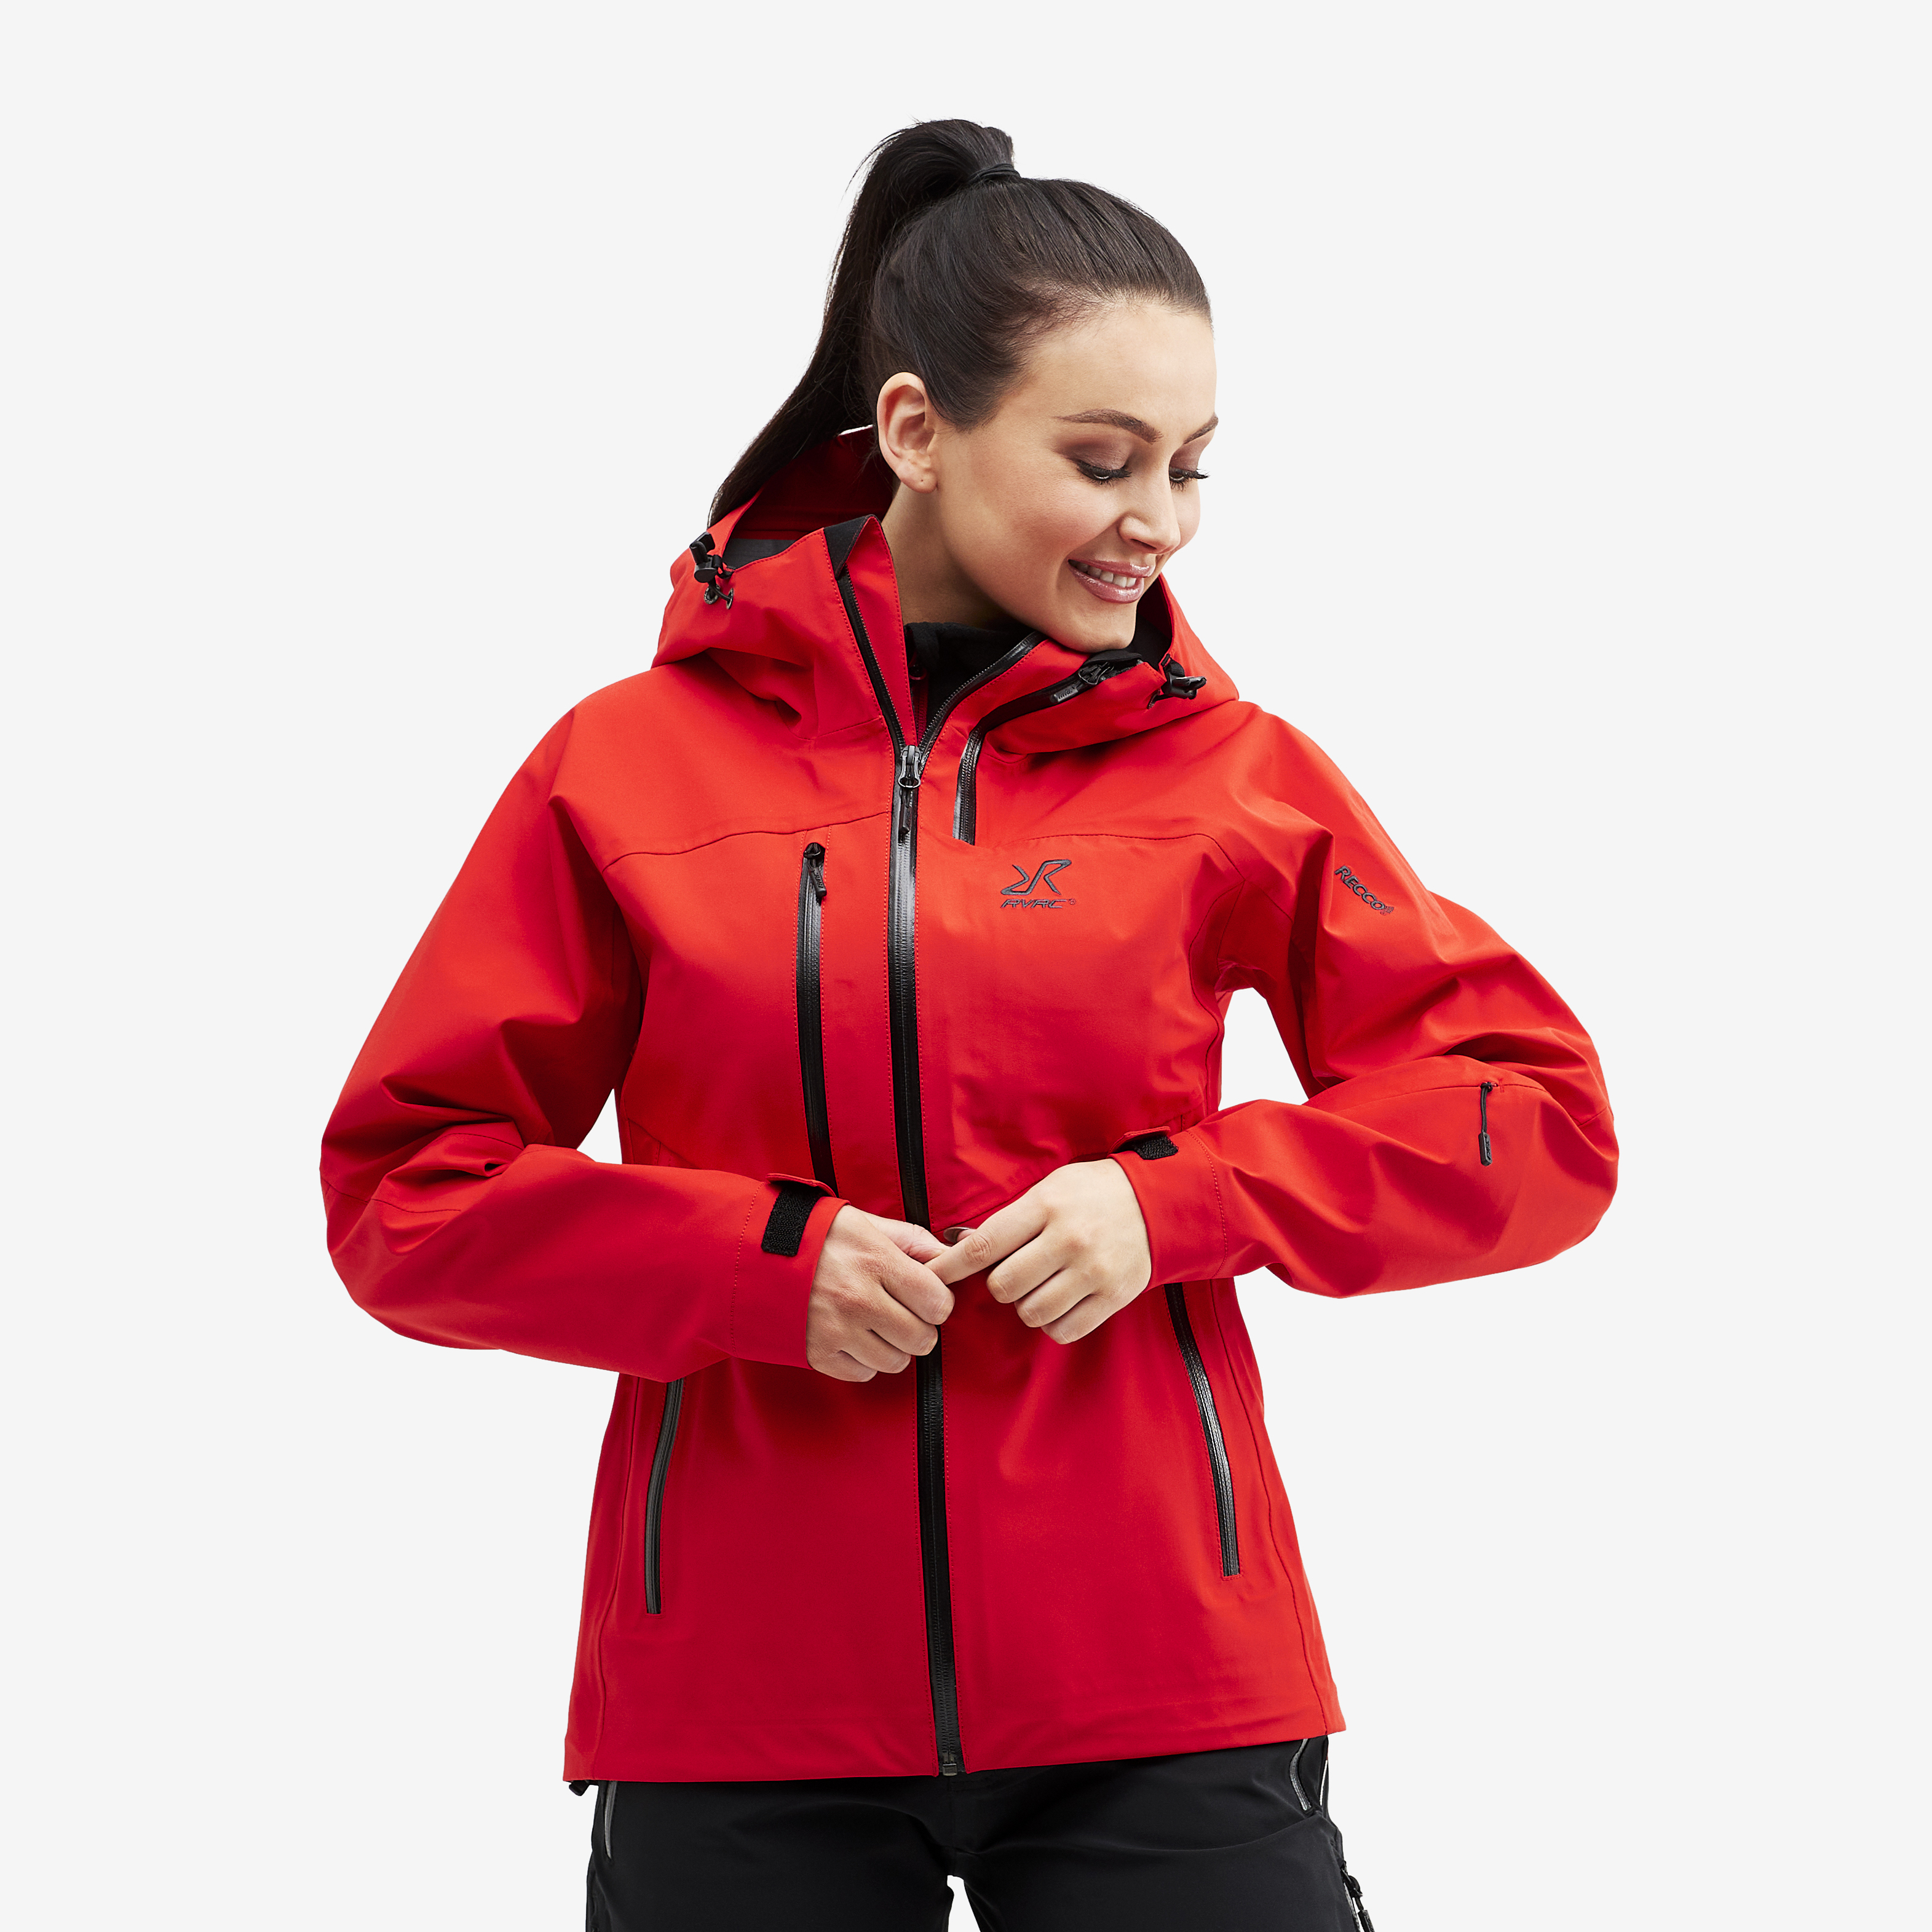 Cyclone Rescue Jacket 2.0 Flame Scarlet Femme